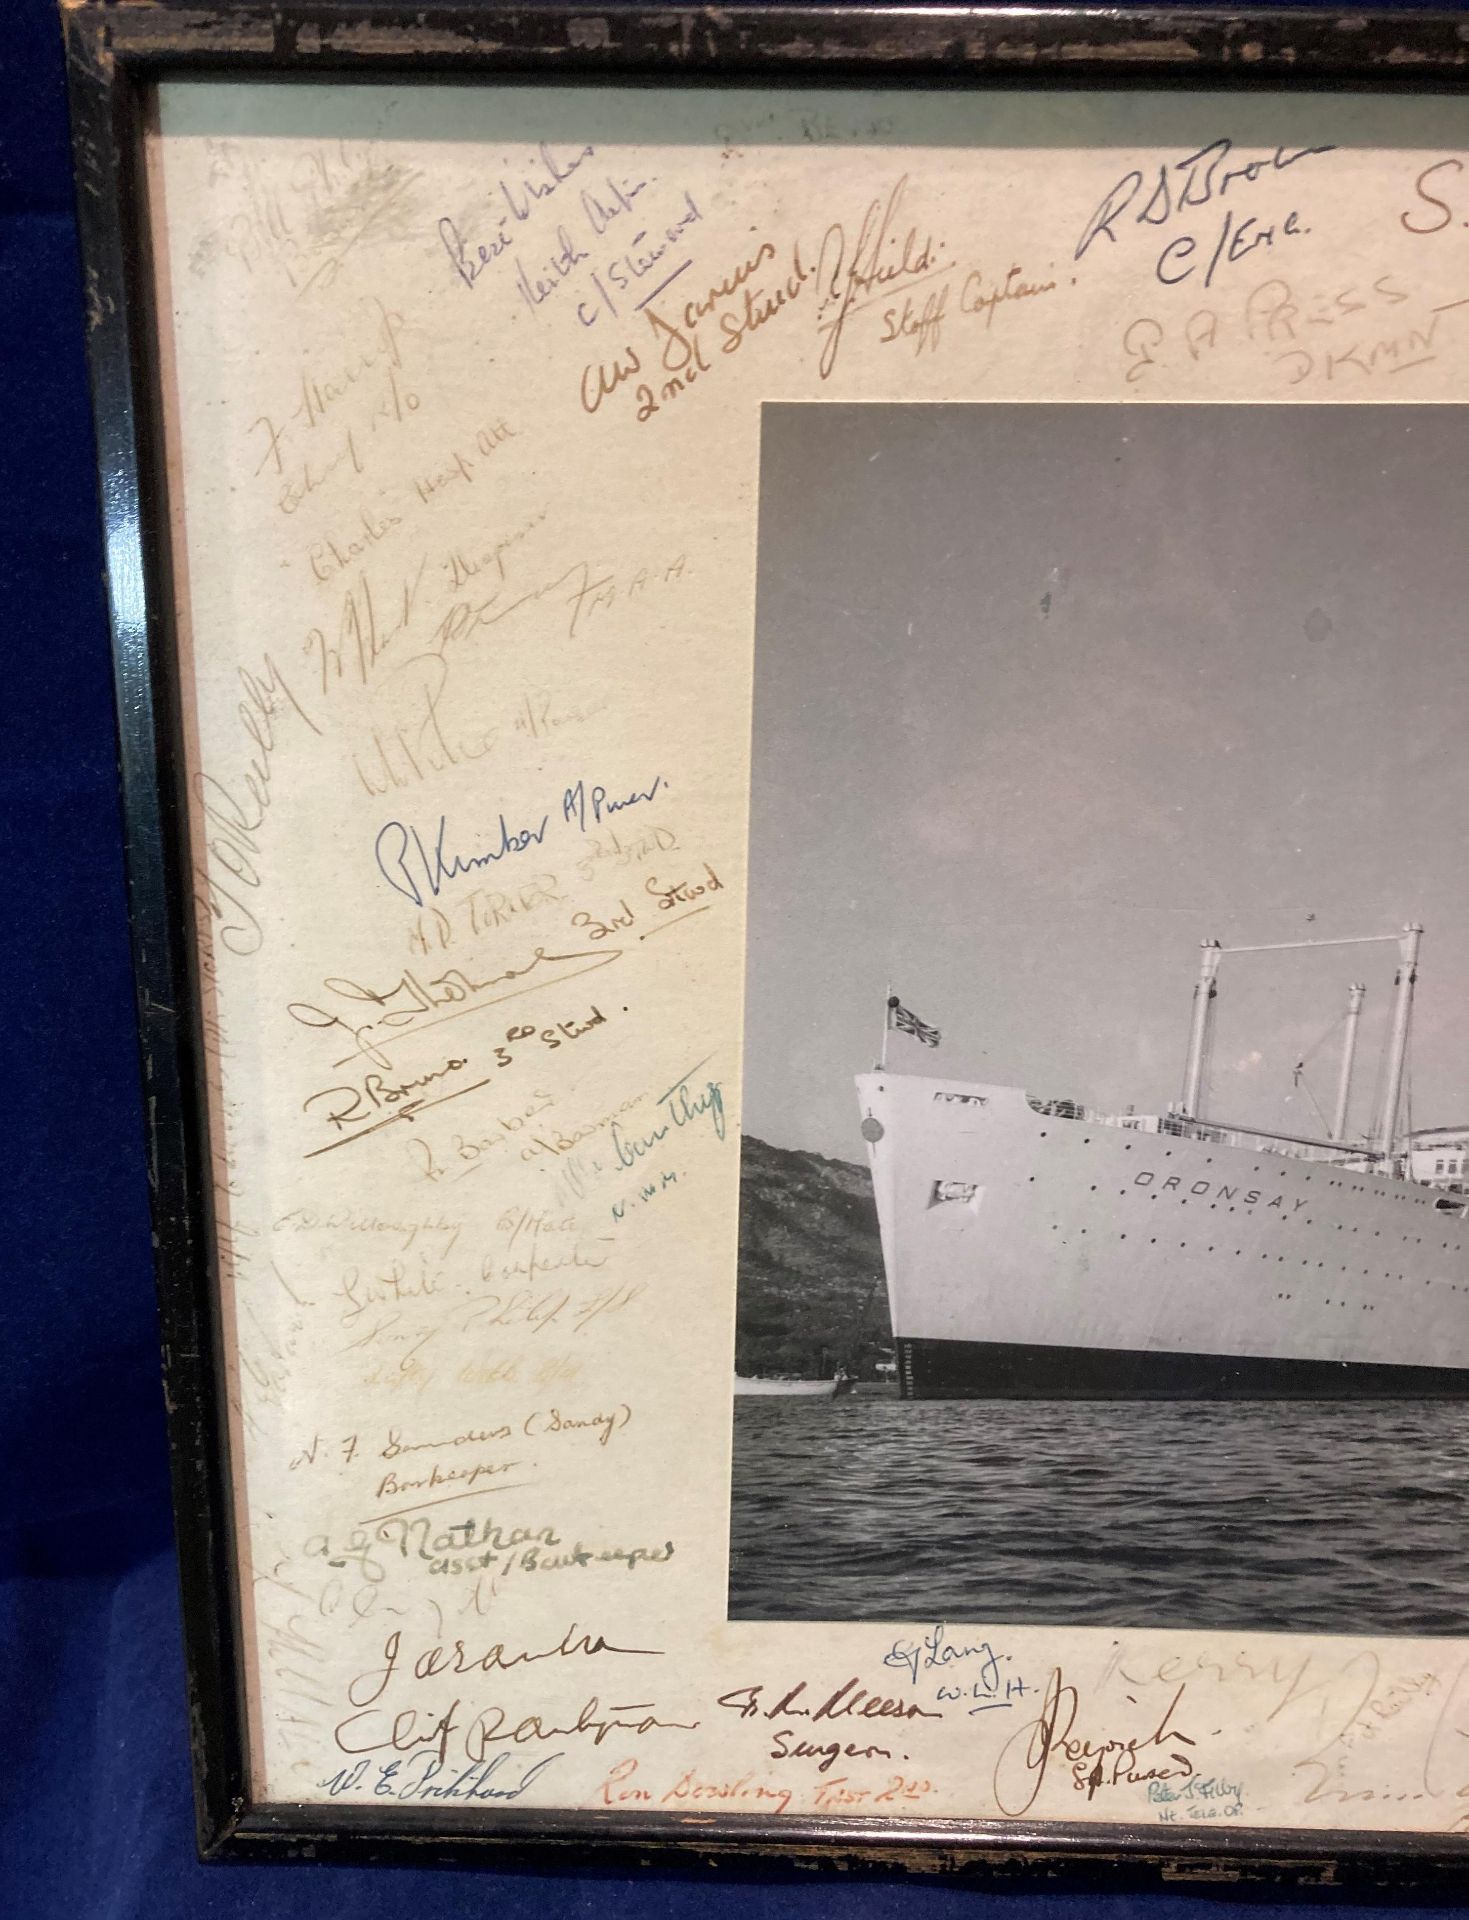 A framed photograph of the ship Oronsay with crew members signatures to the margin (Saleroom - Image 2 of 4